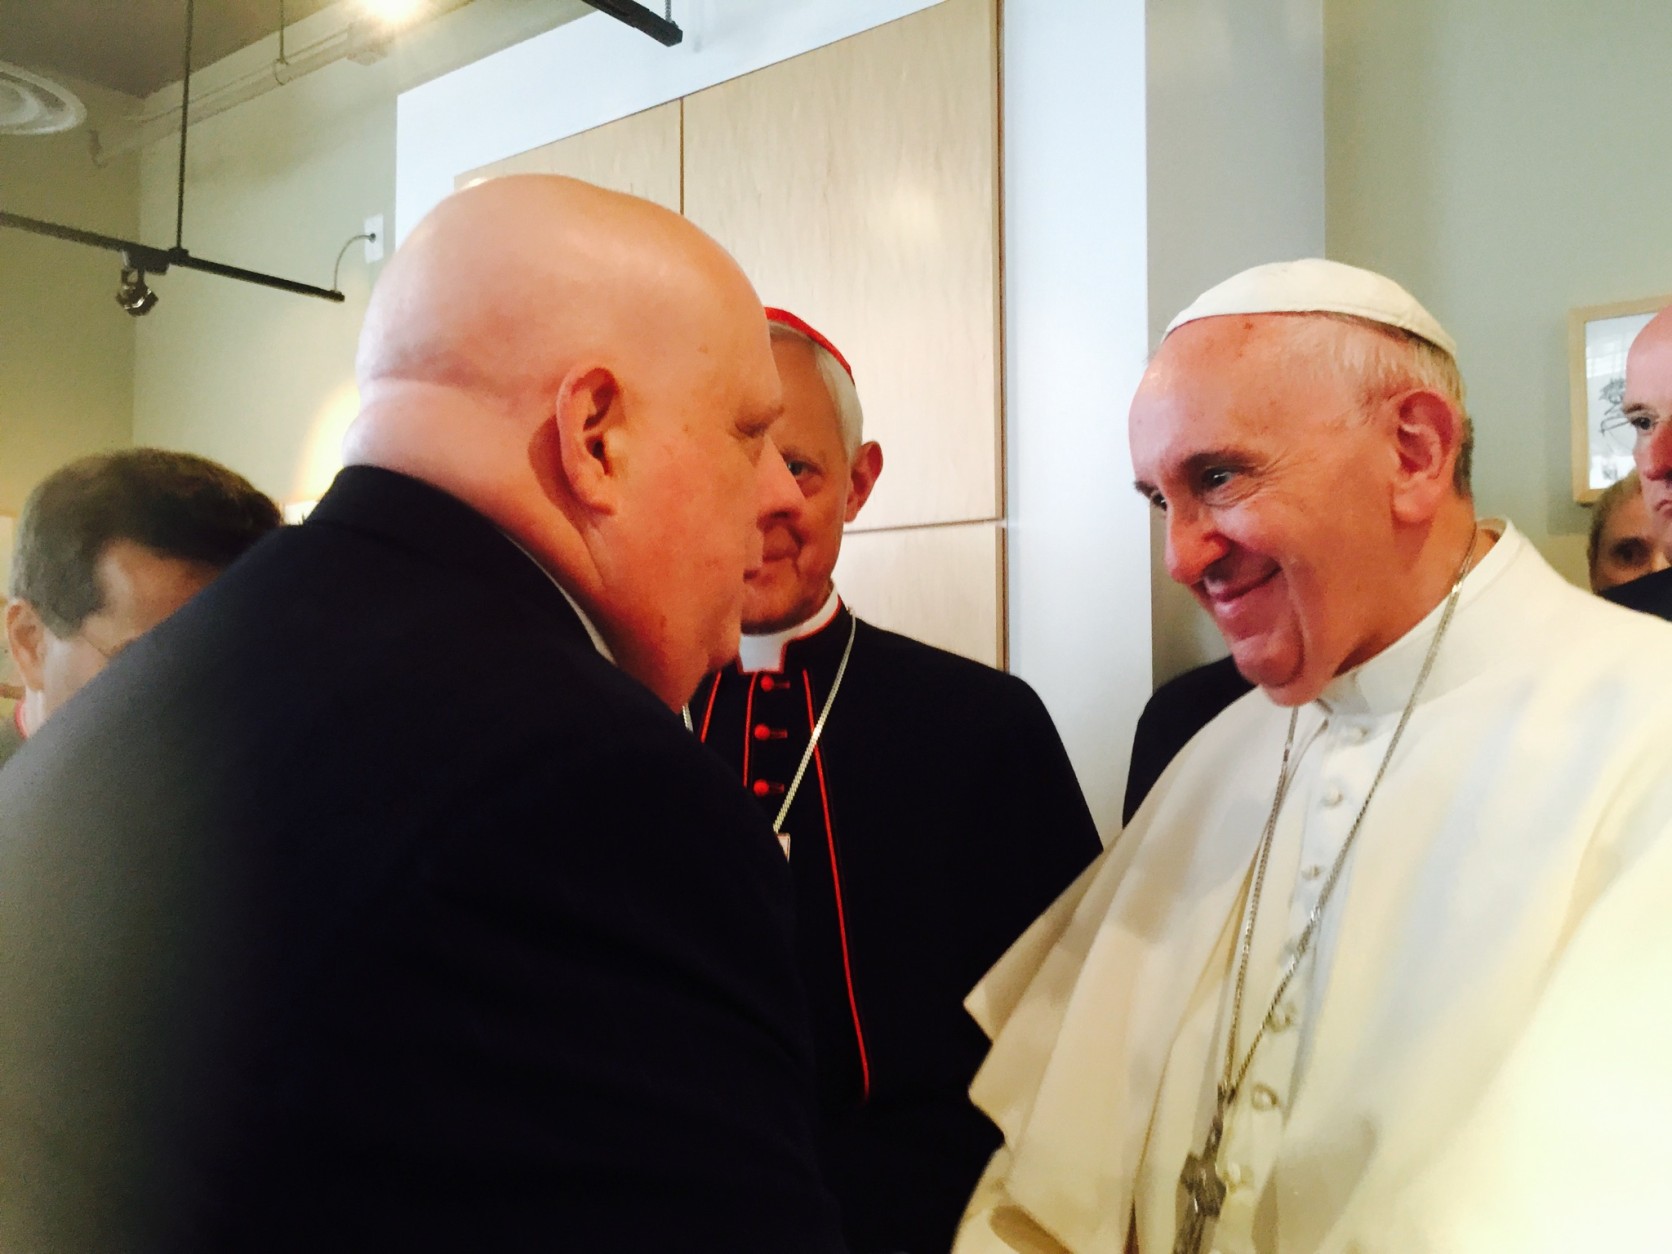 Gov. Hogan says he was first introduced to Pope Francis at Catholic Charities in D.C. on Thursday, Sept. 24, 2015. (Courtesy Office of Gov. Larry Hogan)